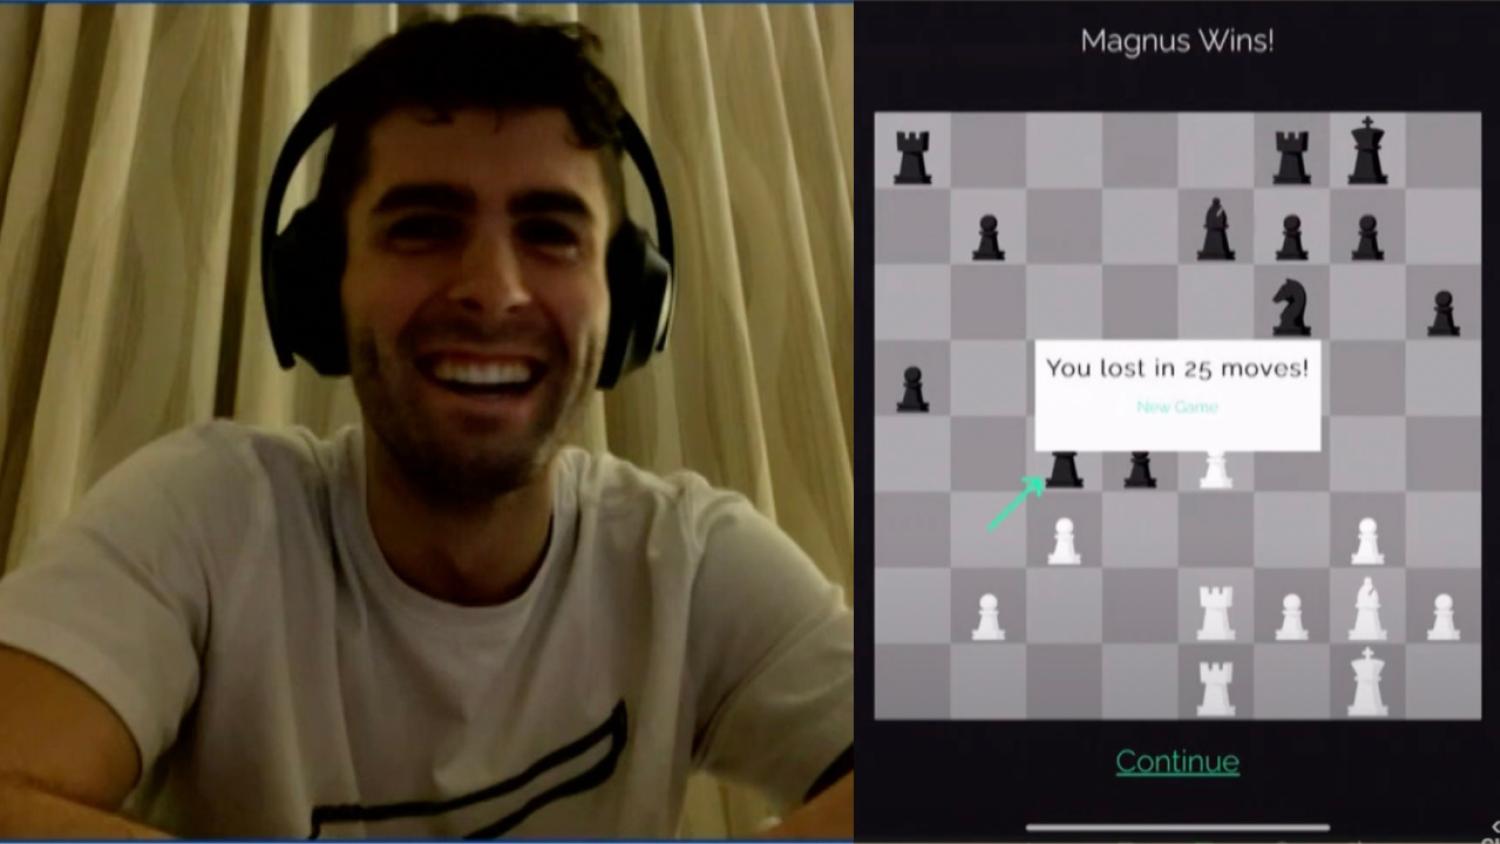 Christian Pulisic compares soccer to chess in chat with grandmaster Magnus  Carlsen - Soccer - Sports - Daily Express US